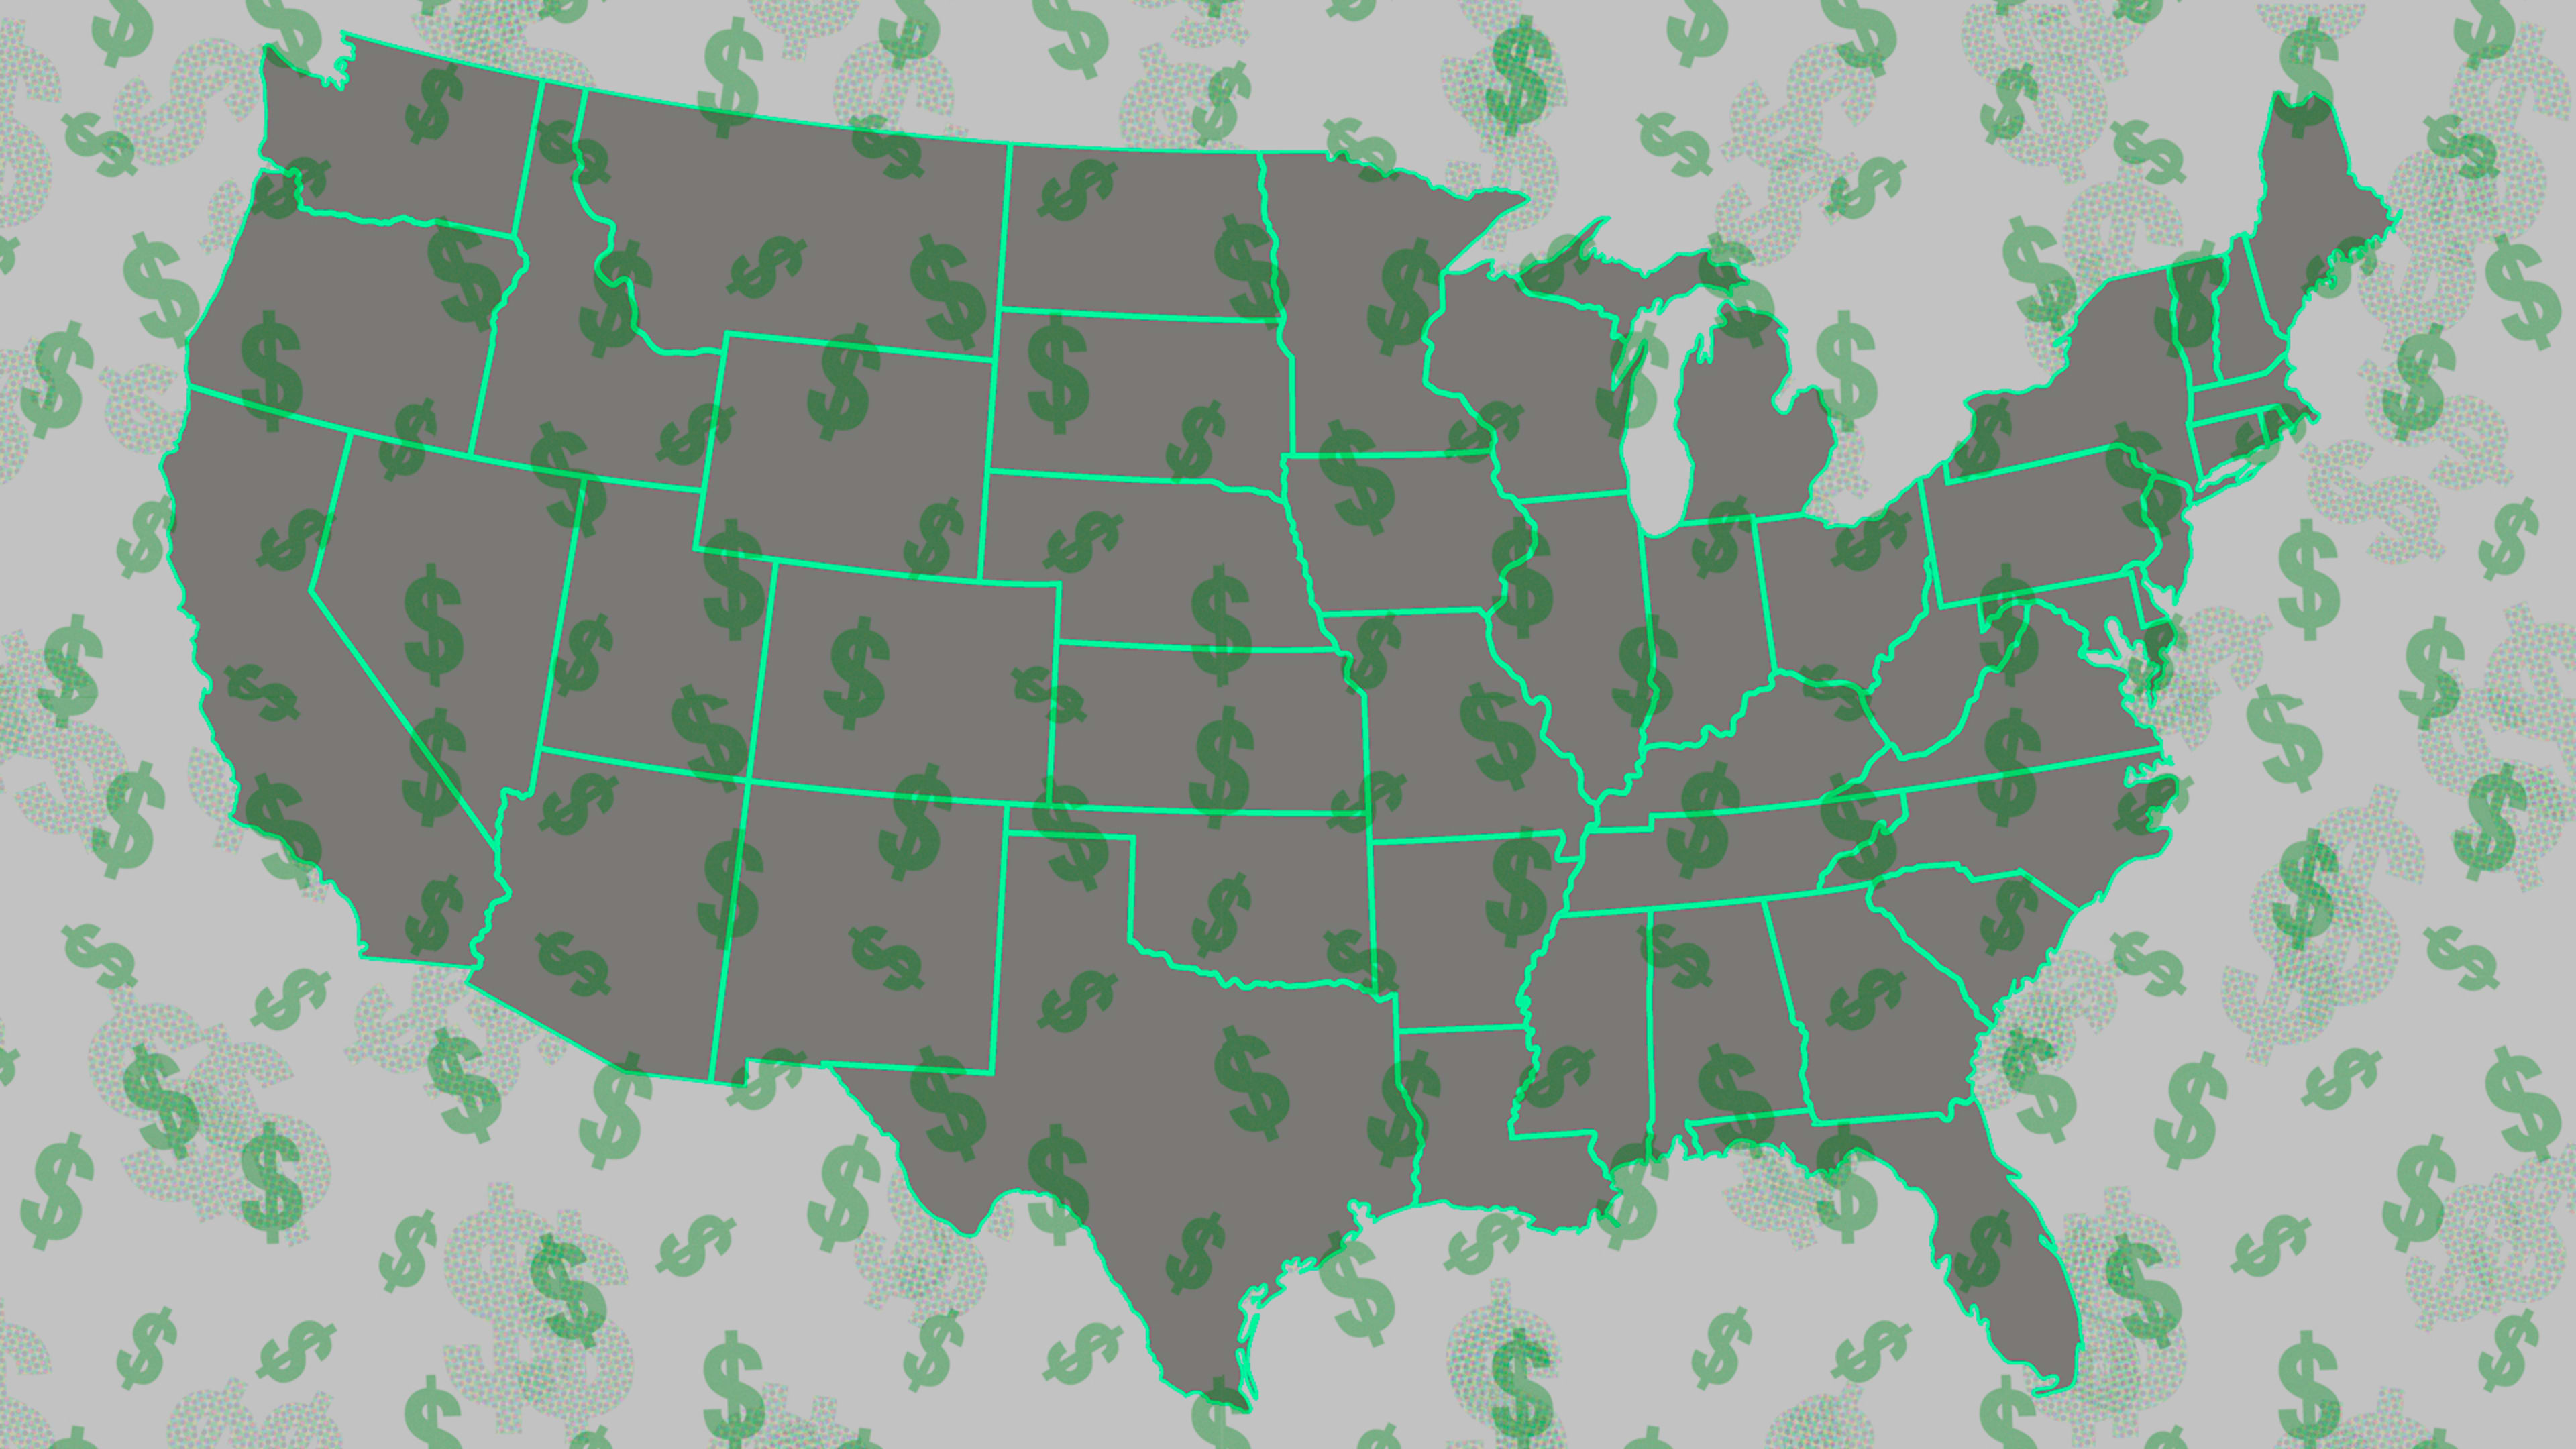 This map shows the largest individual political donor in each state